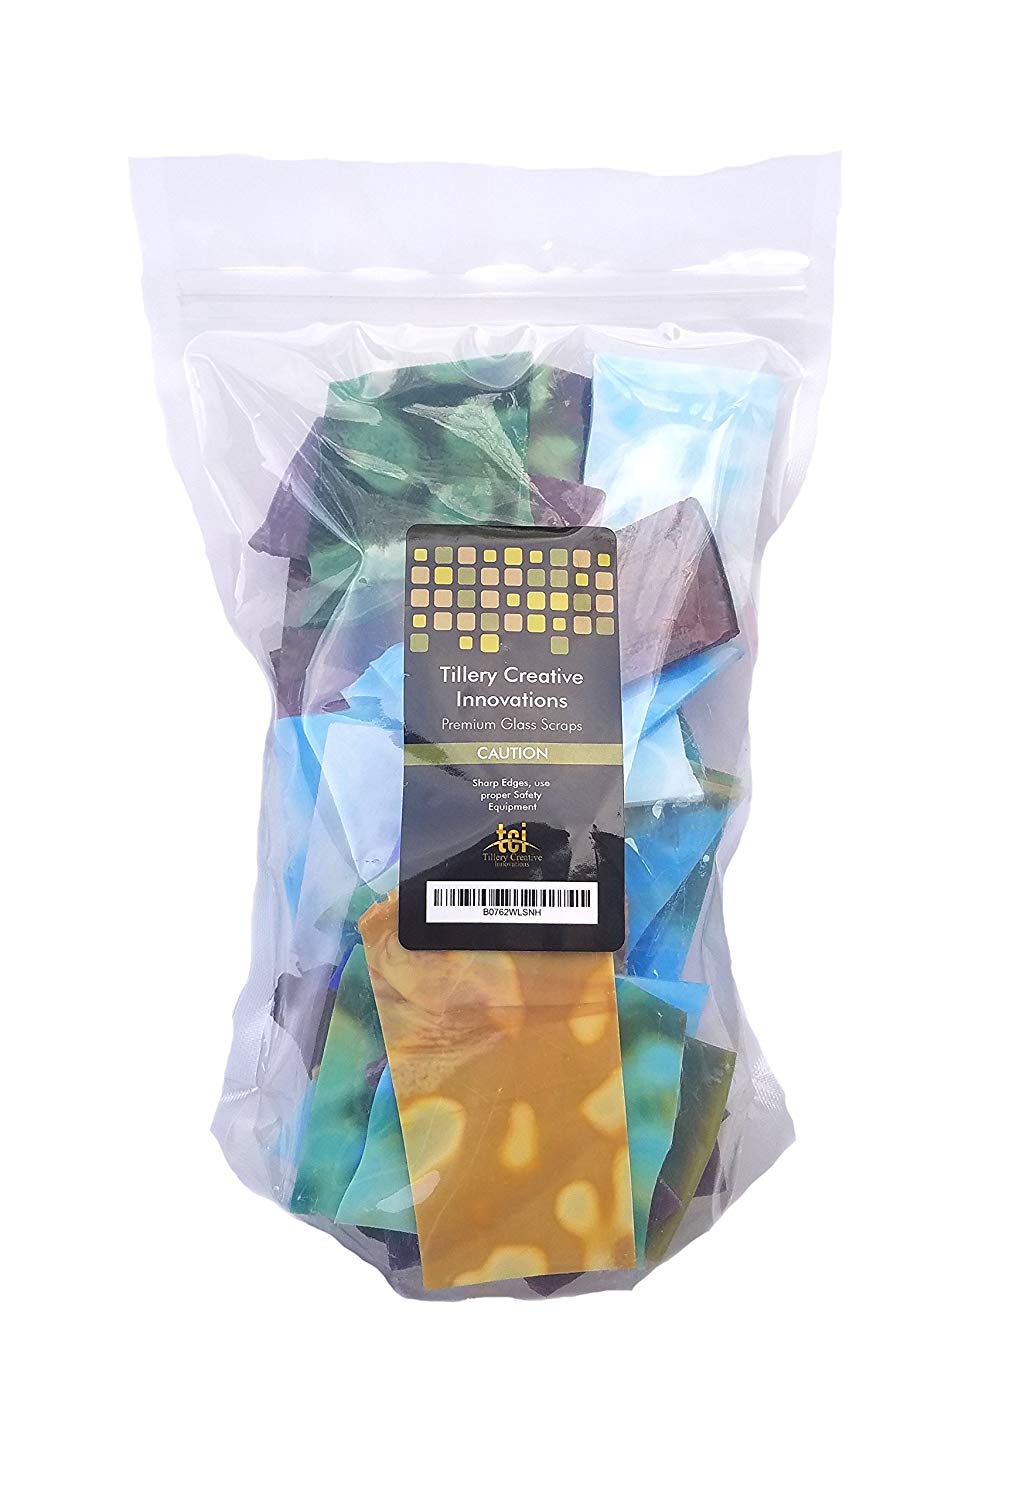 Premium Mosaic Tiles Starter Kit. Includes 3 LBS of our BEAUTIFUL scrap glass